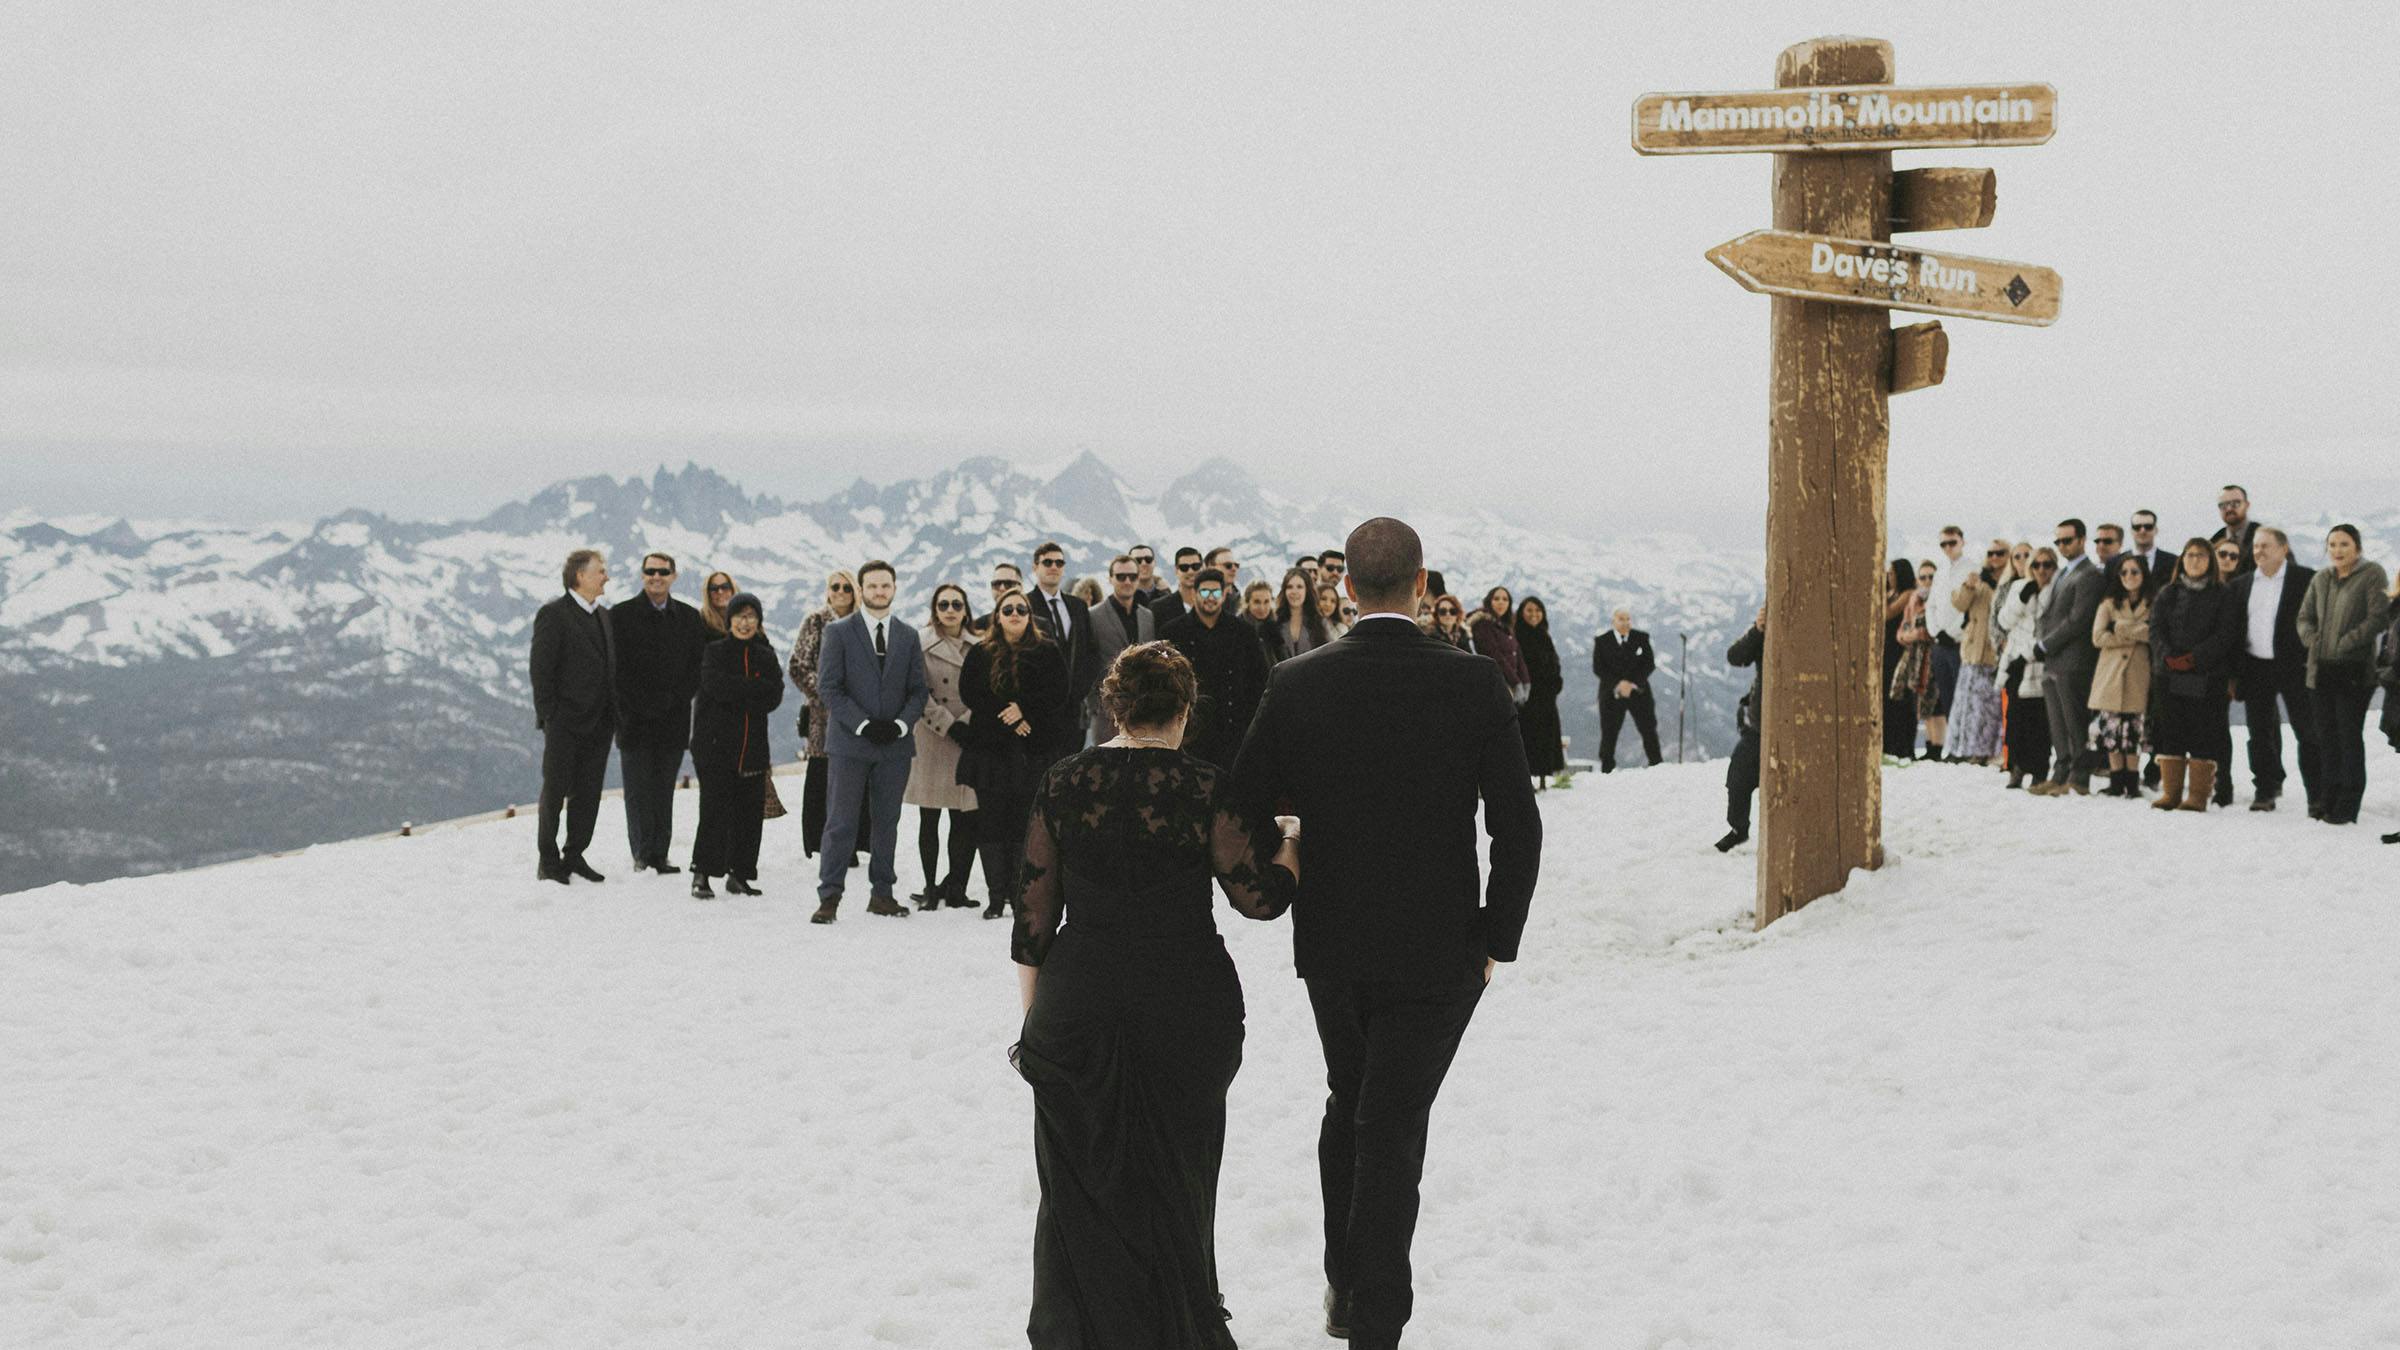 Wedding ceremony at the top of Mammoth Mountain